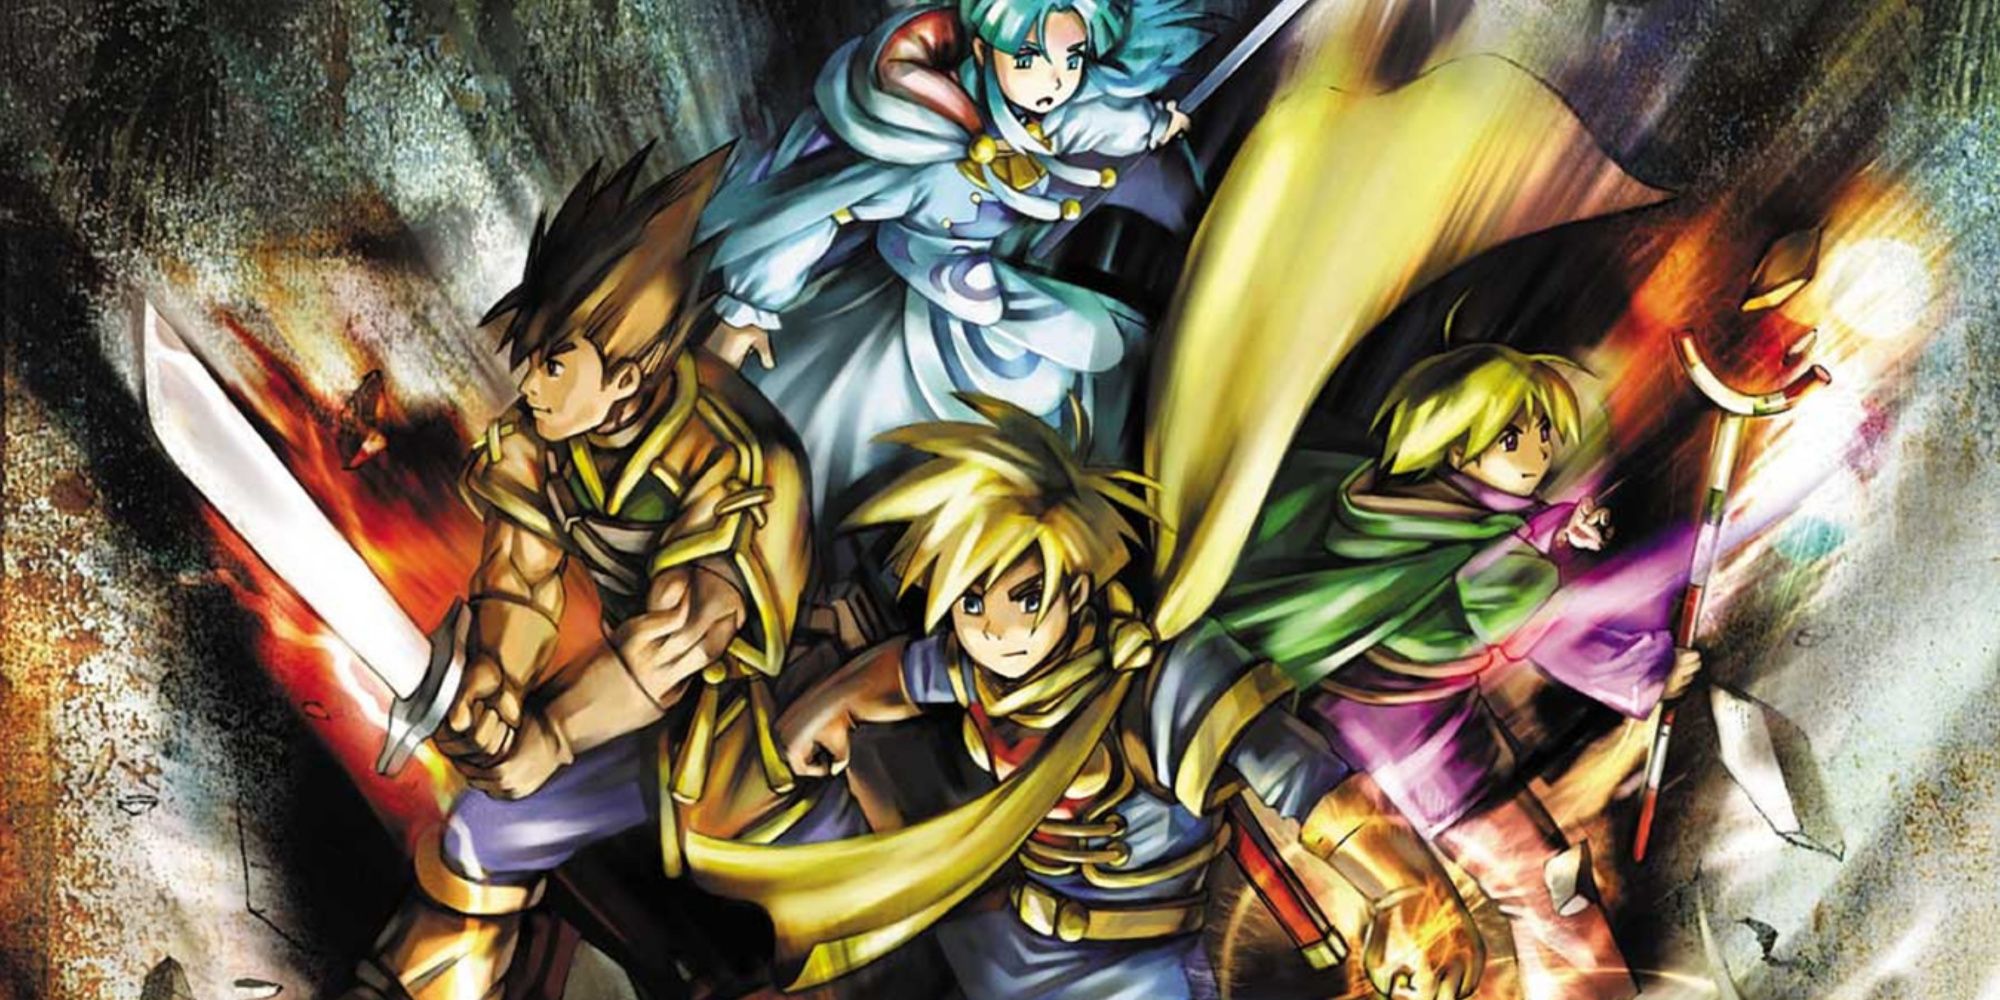 Promo art featuring characters in Golden Sun